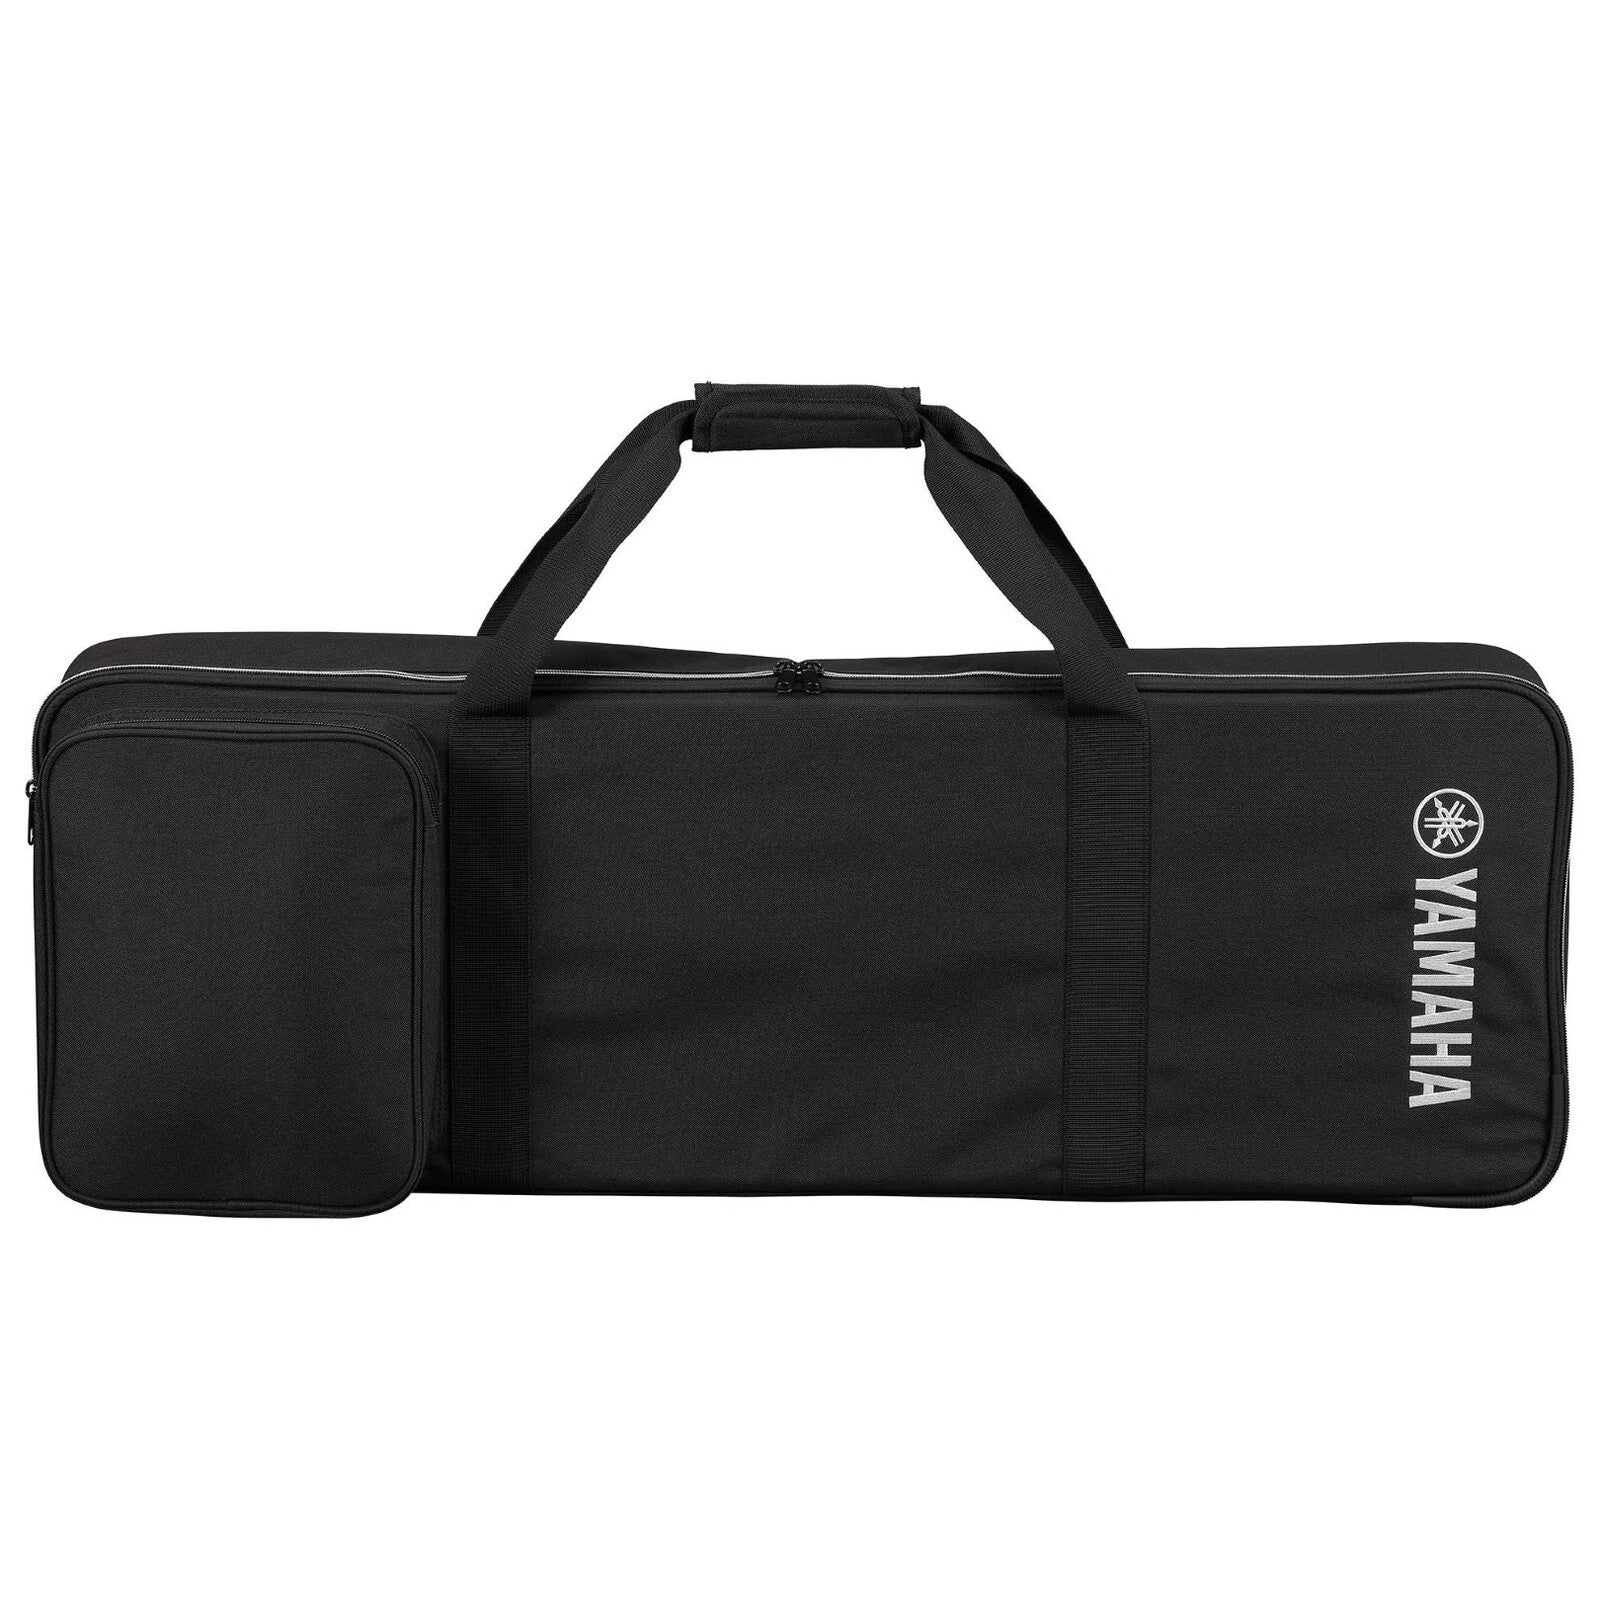 Yamaha SC-DE61 Backpack-style Soft Case for CK61 Stage Keyboard | Zoso Music Sdn Bhd